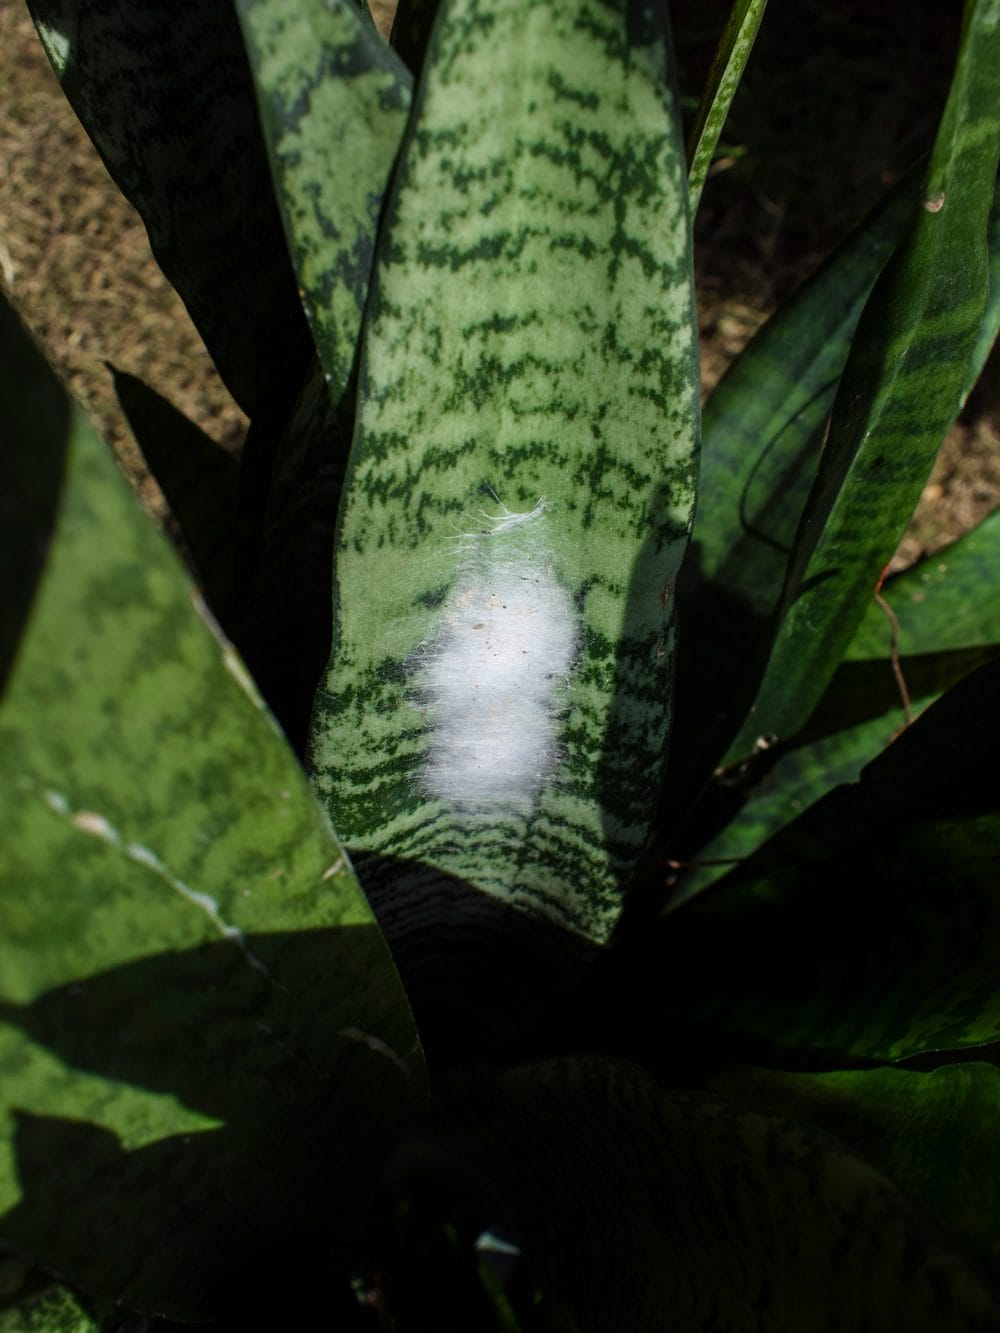 White fuzzy cobweb type of mold like thing growth on leaf of a Snake plant leaf. Fungus disease damage on leaves